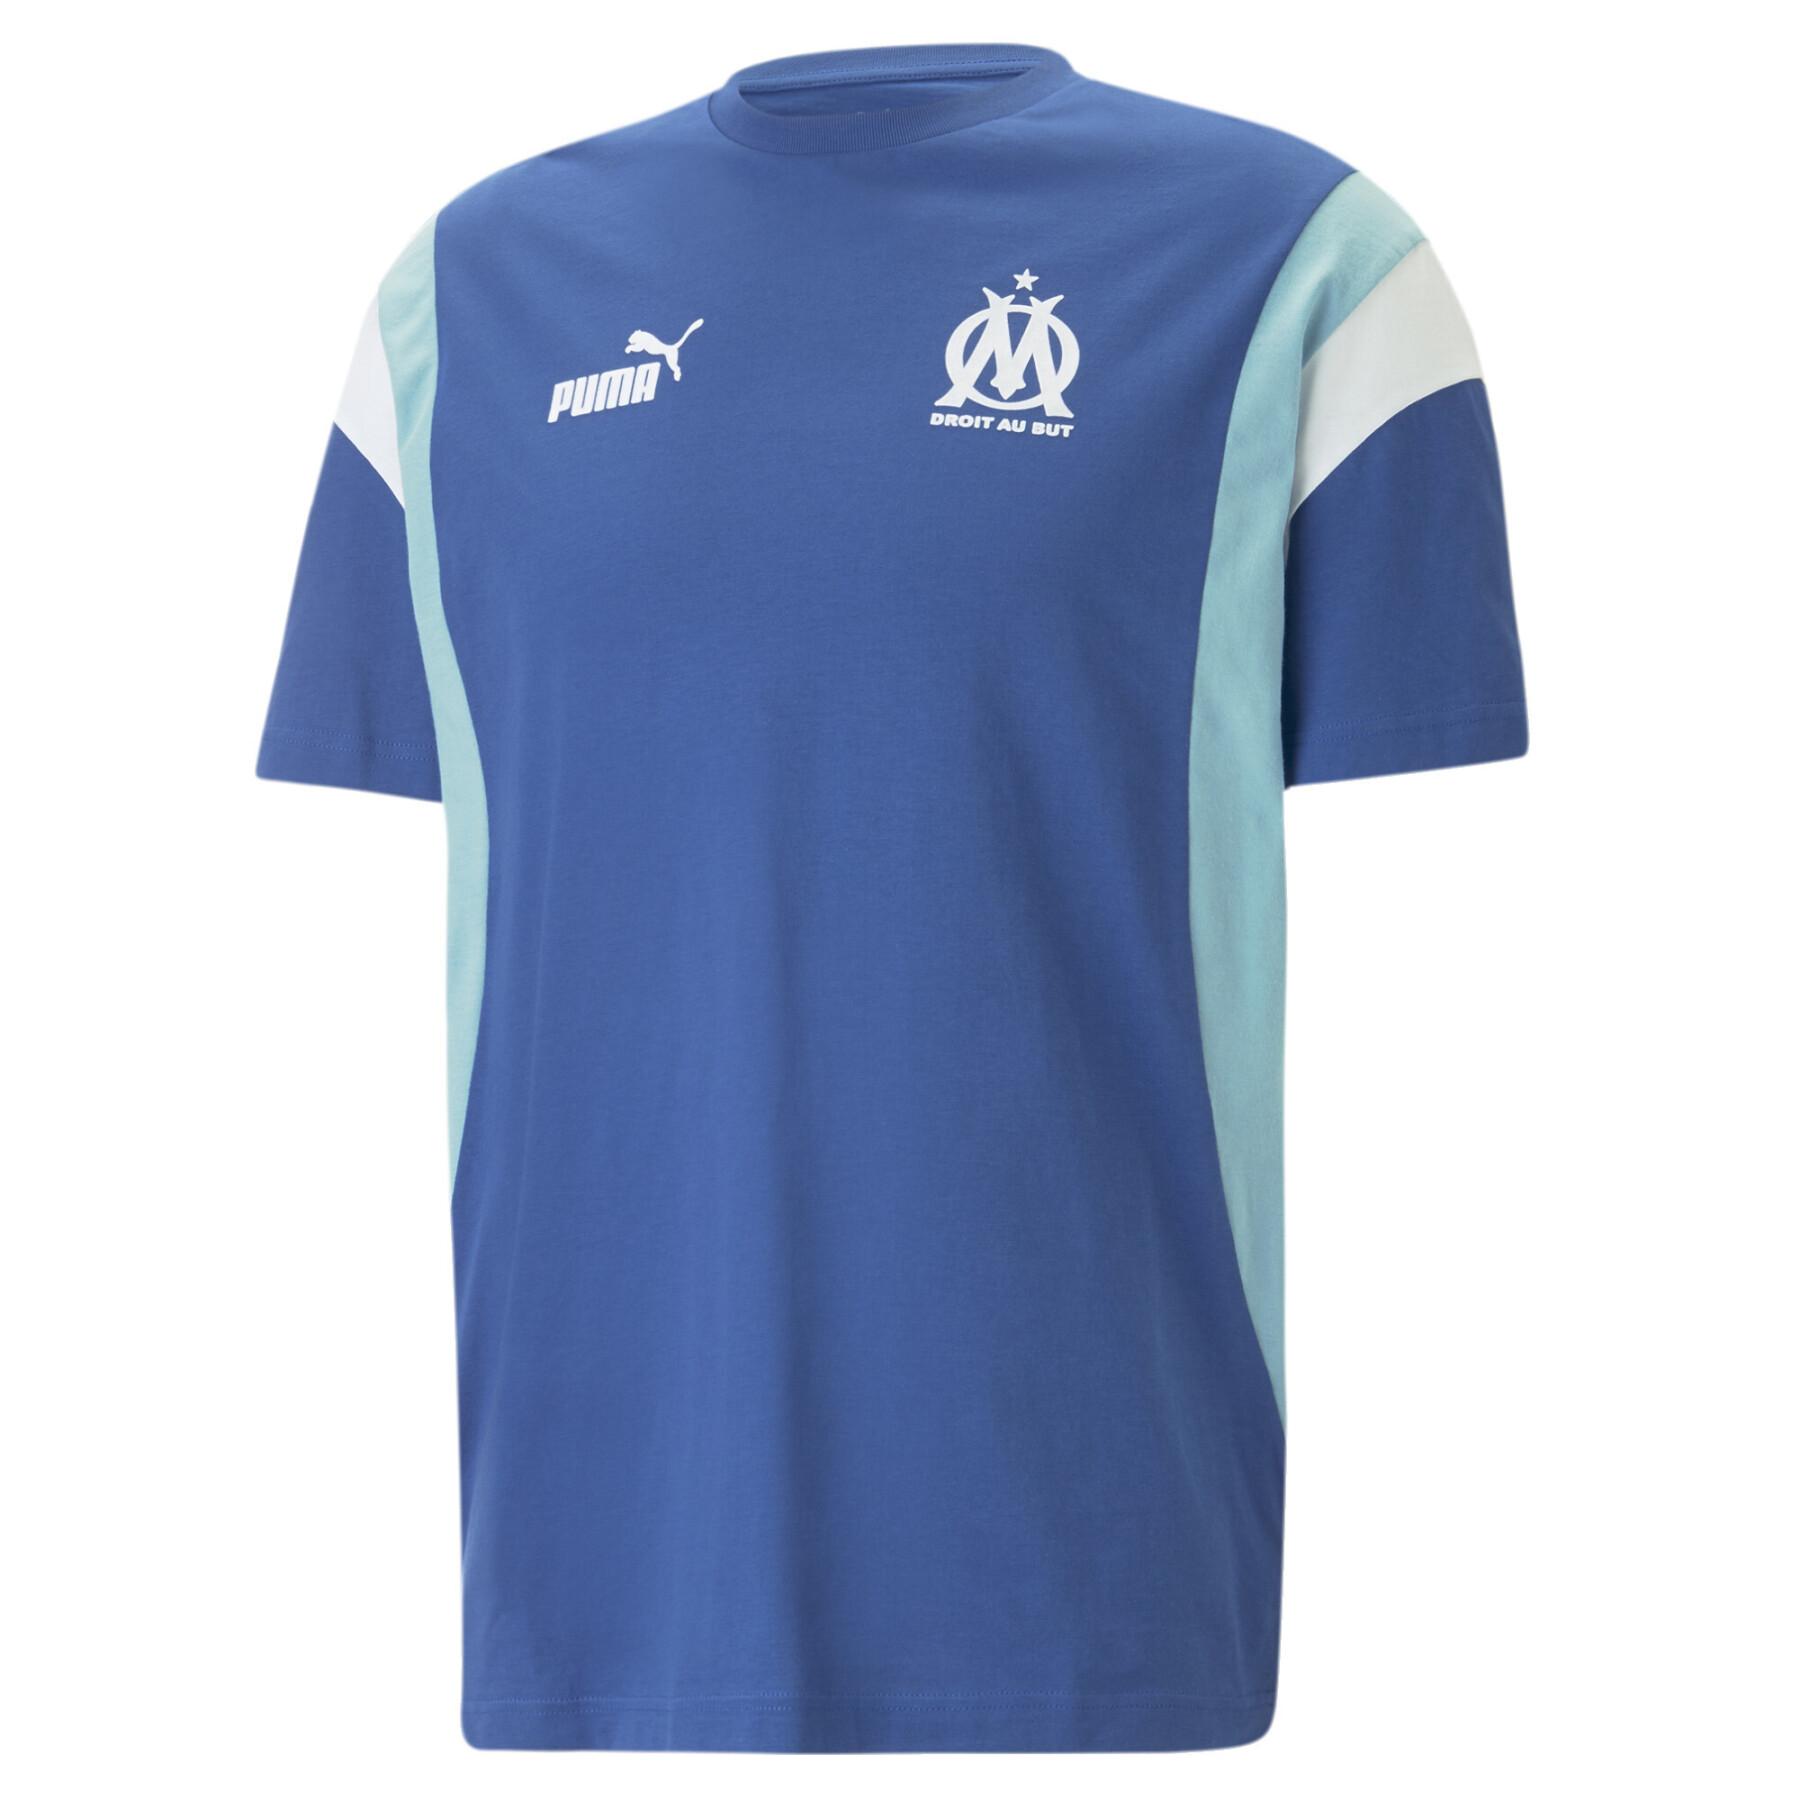 om archive t-shirt 2022/23